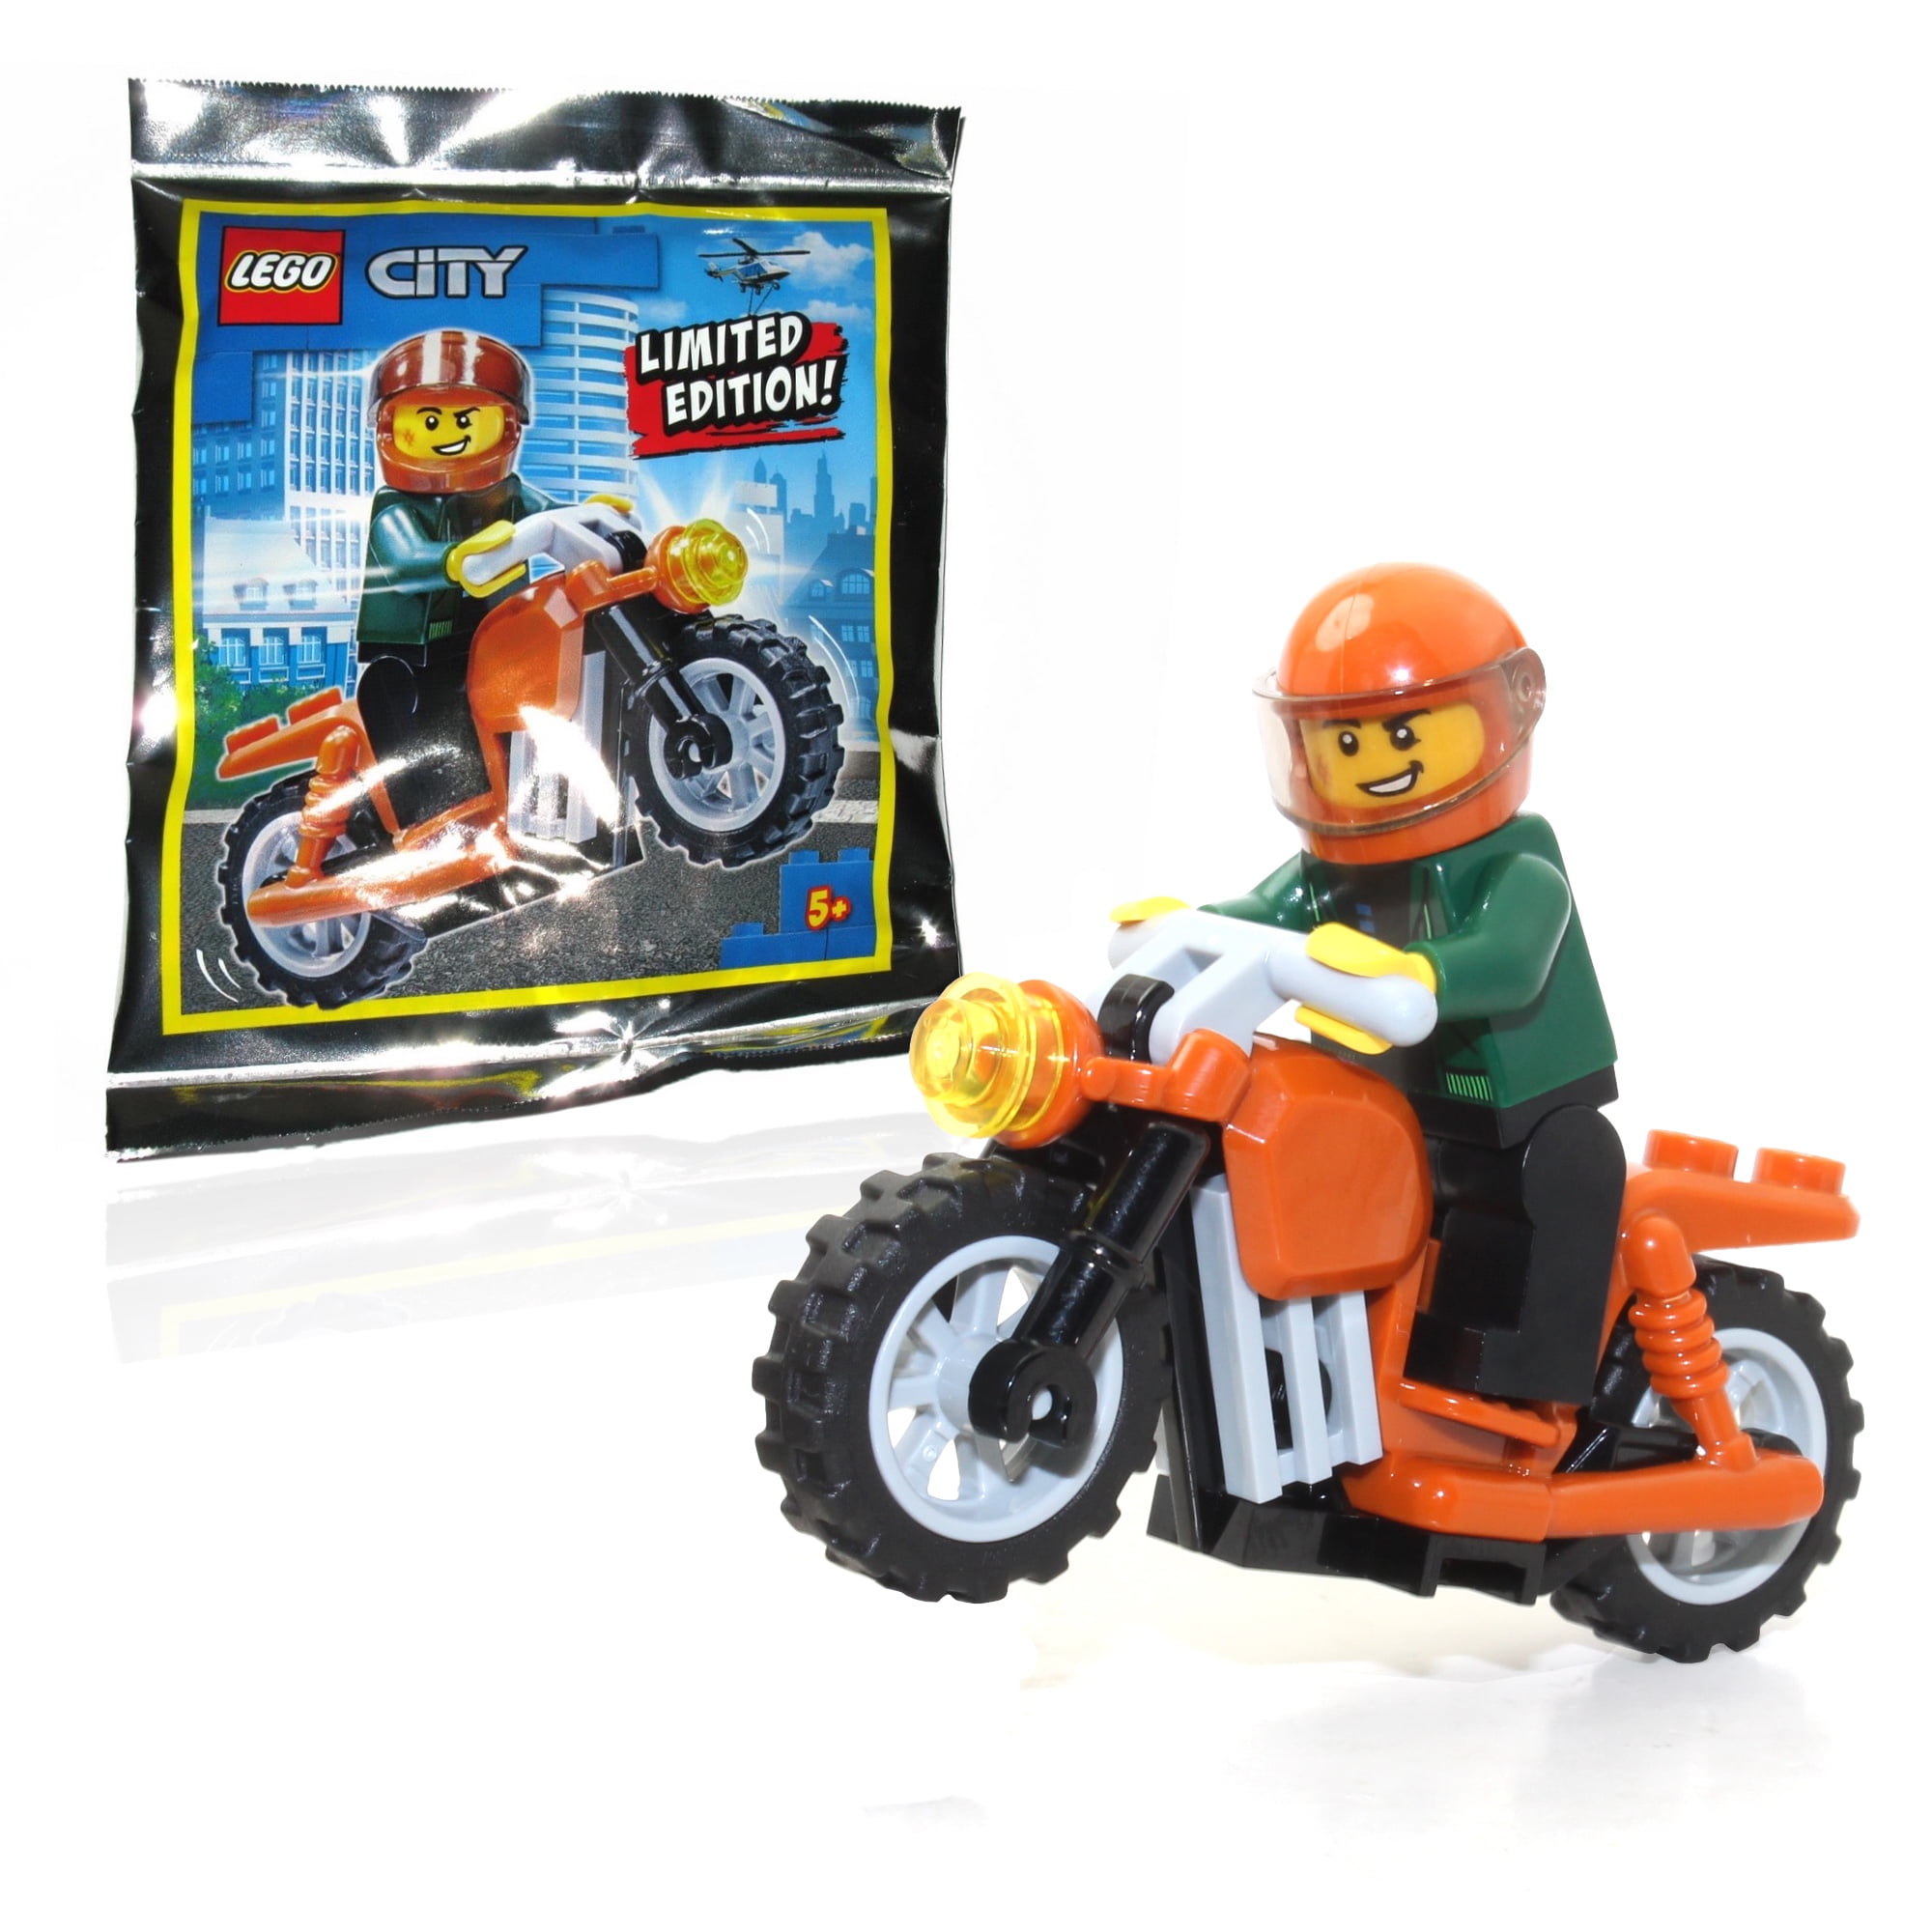 LEGO Town City - Cool Kid Dark Orange Motorcycle Foil Pack Limited Edition (16 Pieces) - Walmart.com